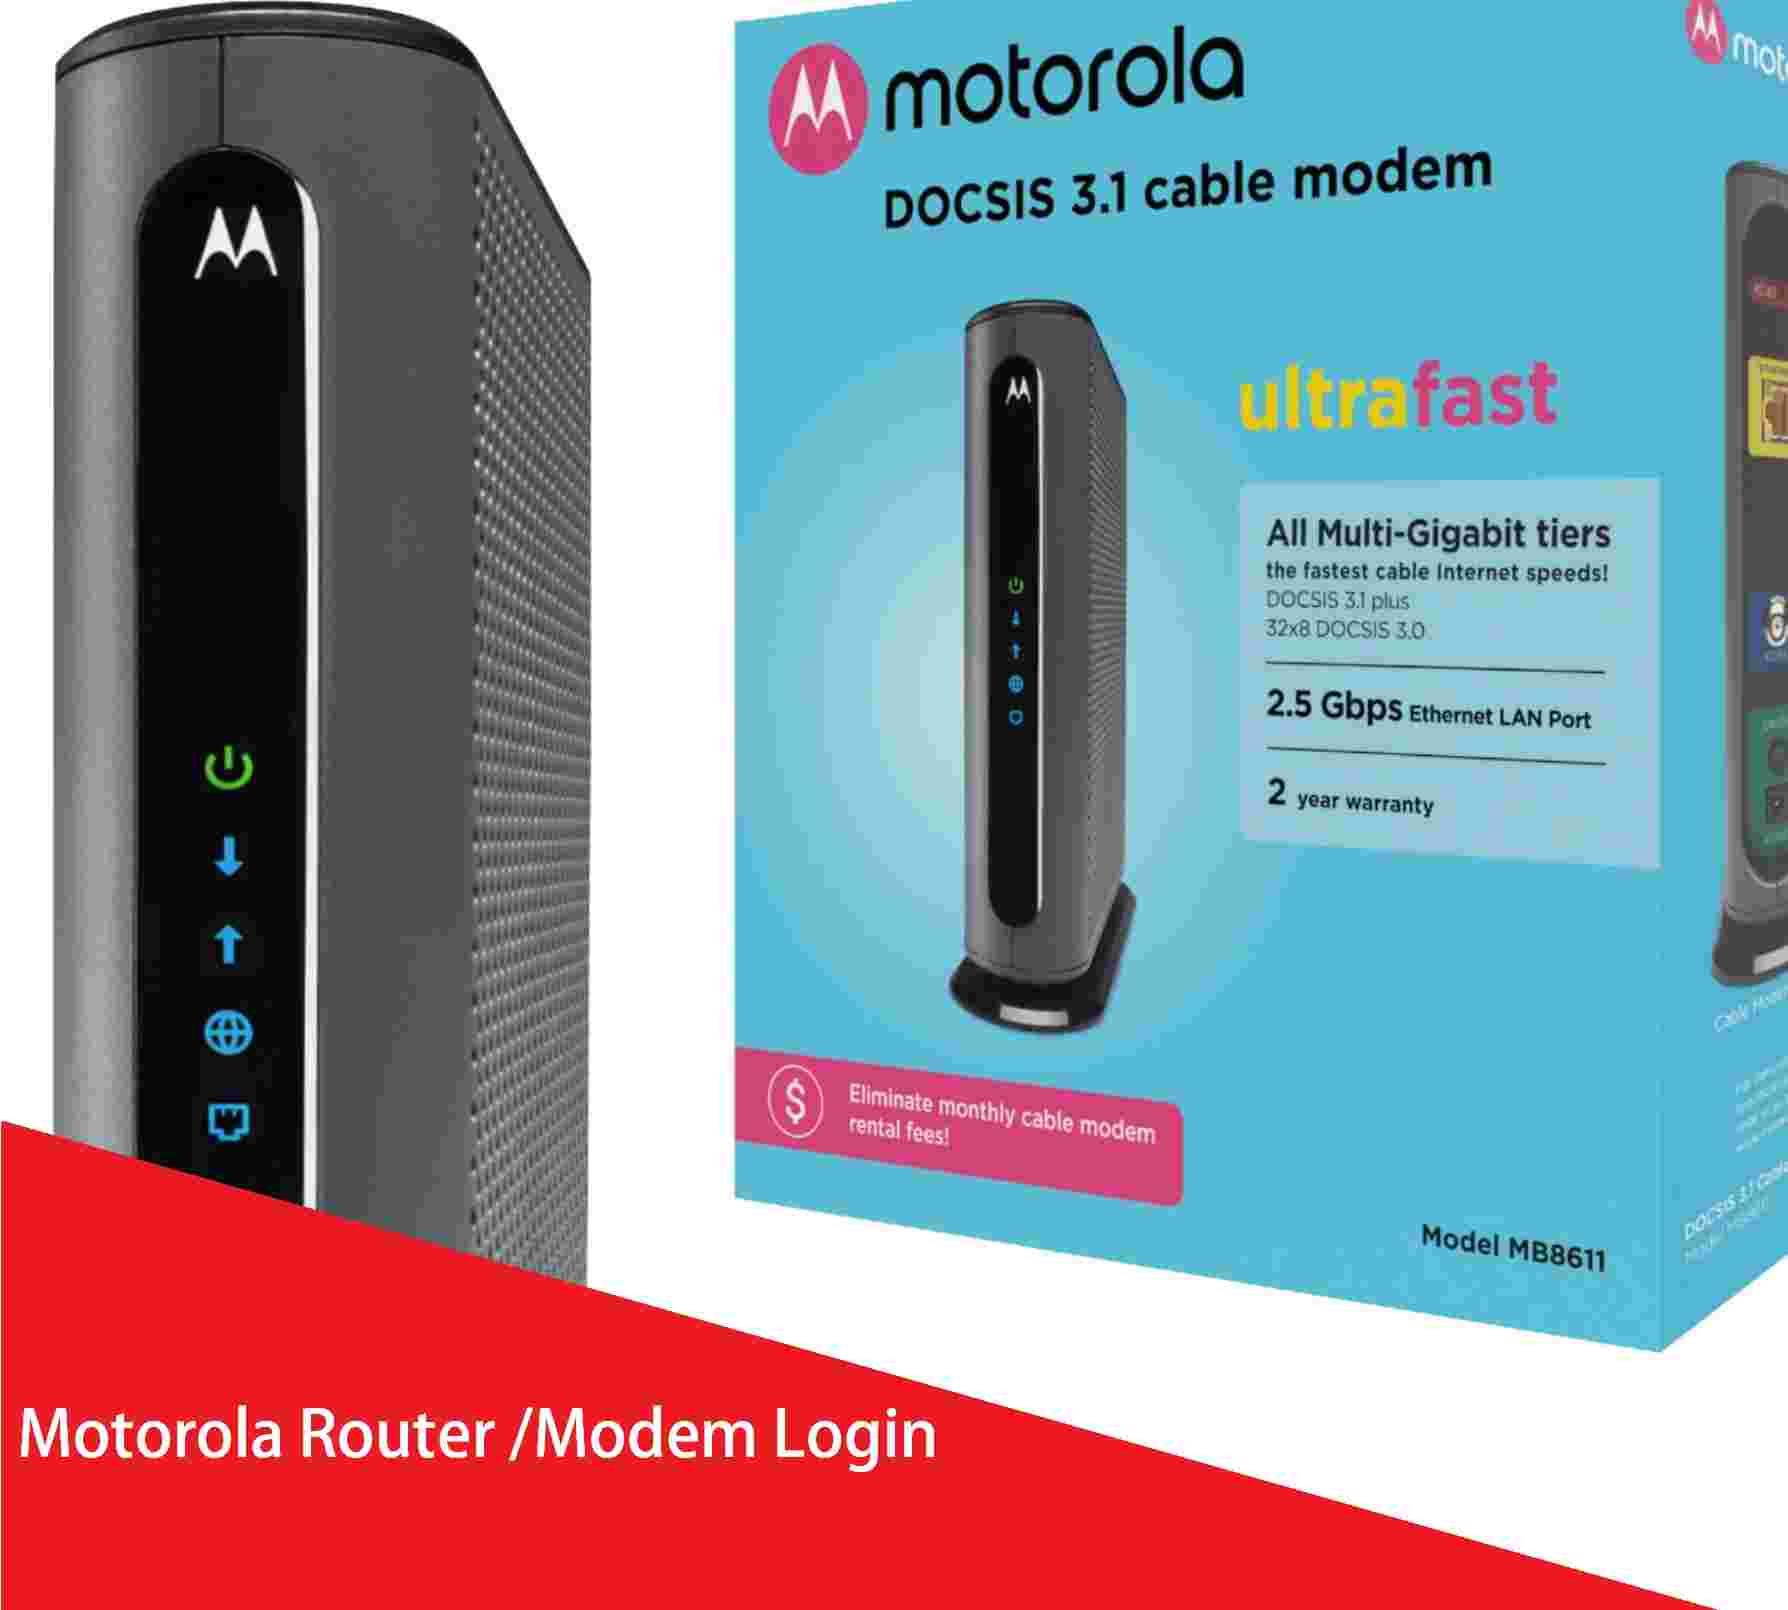 Motorola Router Login: How to Access Your Router Settings